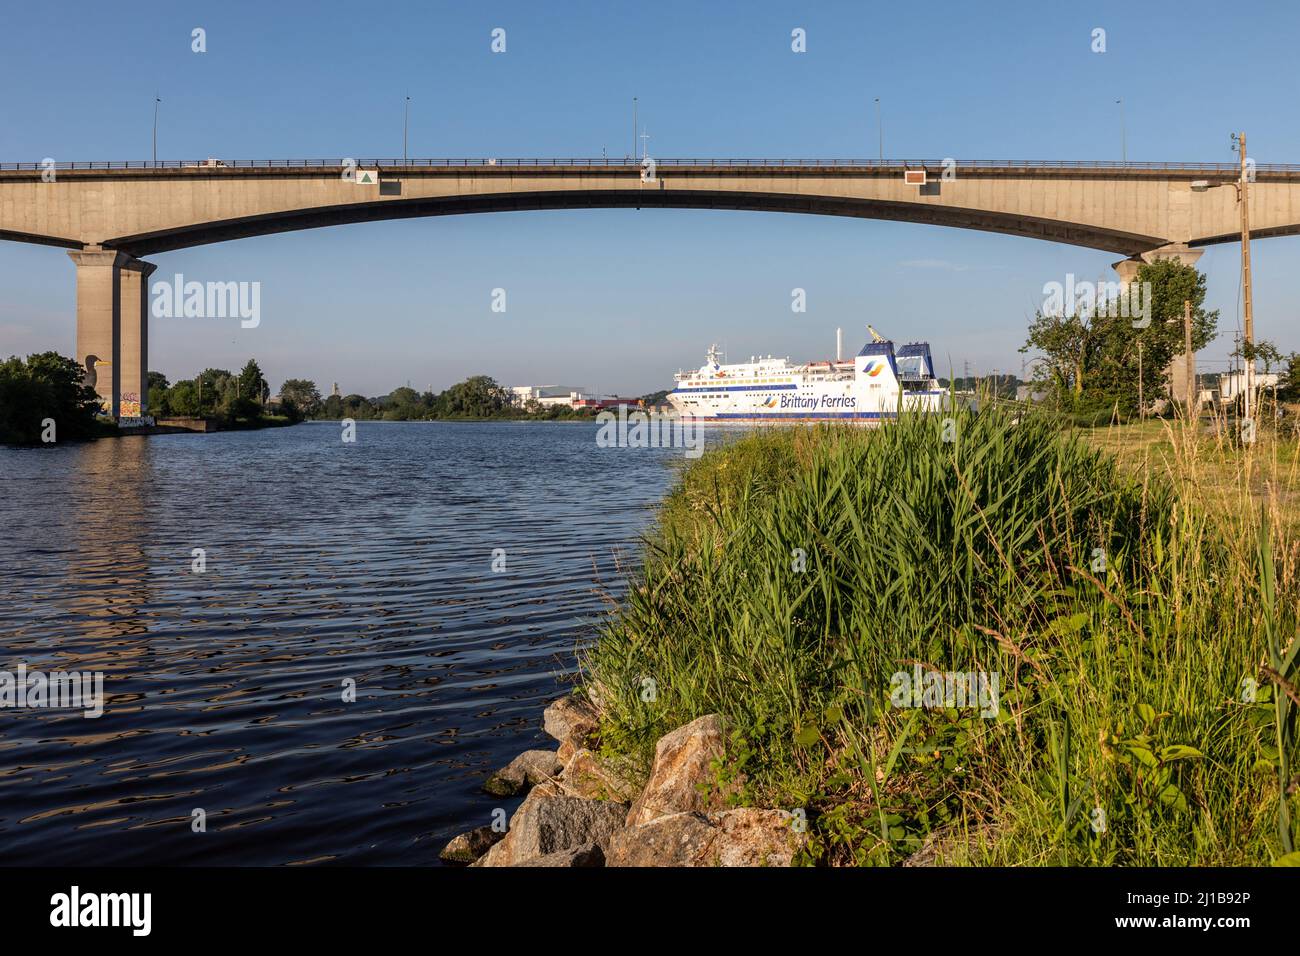 BRITTANY FERRIES BOAT AND CALIX VIADUCT ABOVE THE CANAL RUNNING FROM CAEN TO THE SEA, CAEN, CALVADOS, NORMANDY, FRANCE Stock Photo